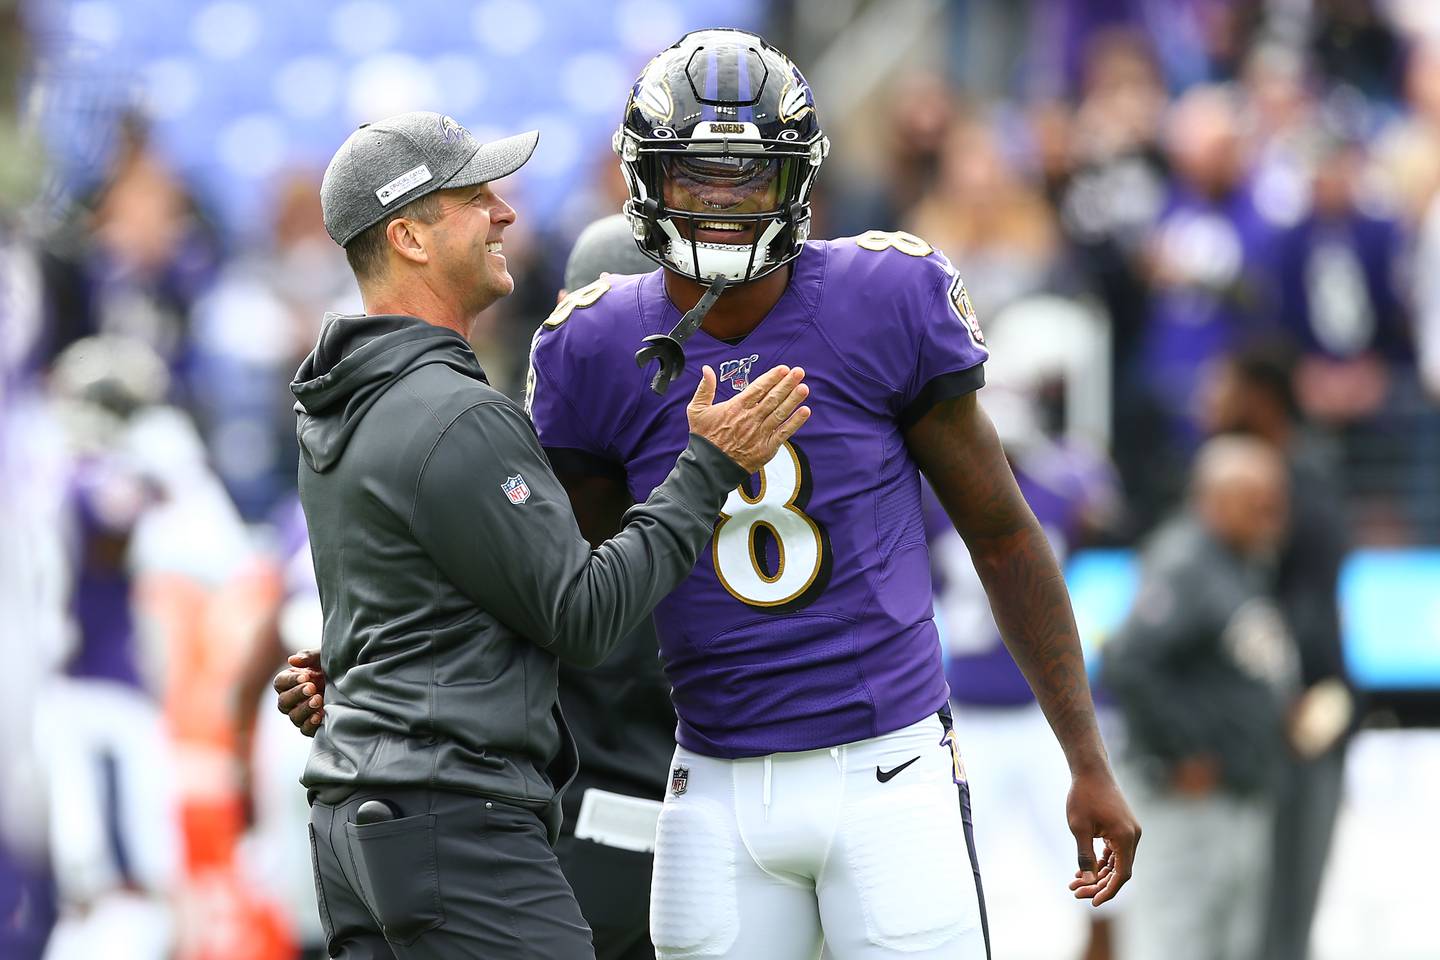 BALTIMORE, MD - OCTOBER 13: Head coach John Harbaugh interacts with Lamar Jackson #8 of the Baltimore Ravens prior to playing against the Cincinnati Bengals at M&T Bank Stadium on October 13, 2019 in Baltimore, Maryland.